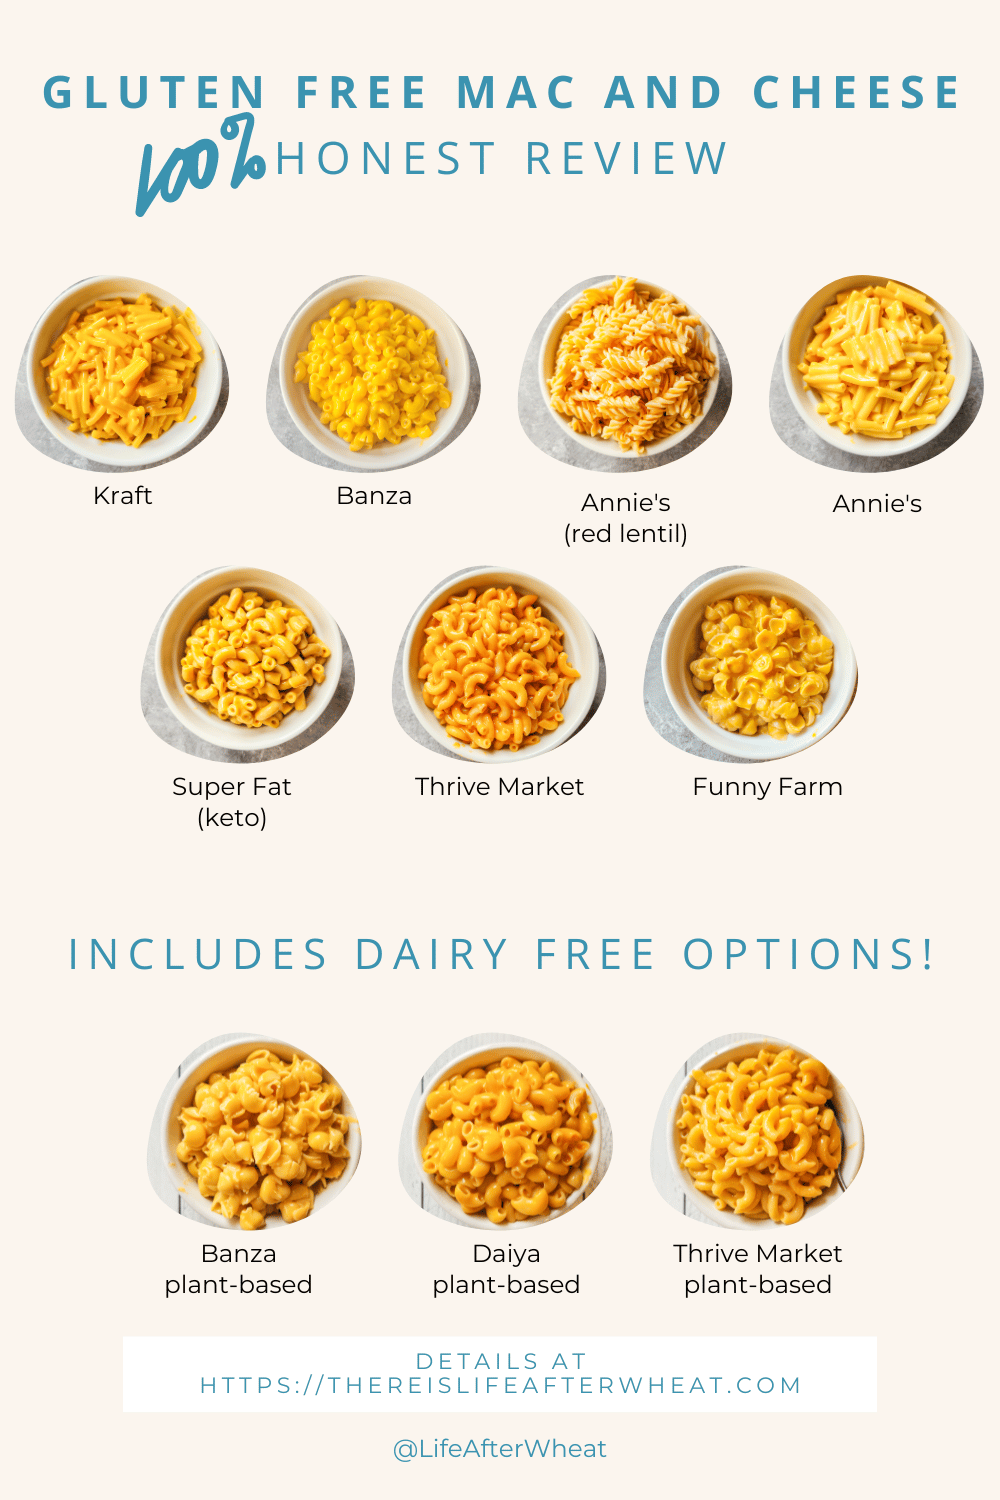 Remember Kraft Mac & Cheese? It now comes gluten free!